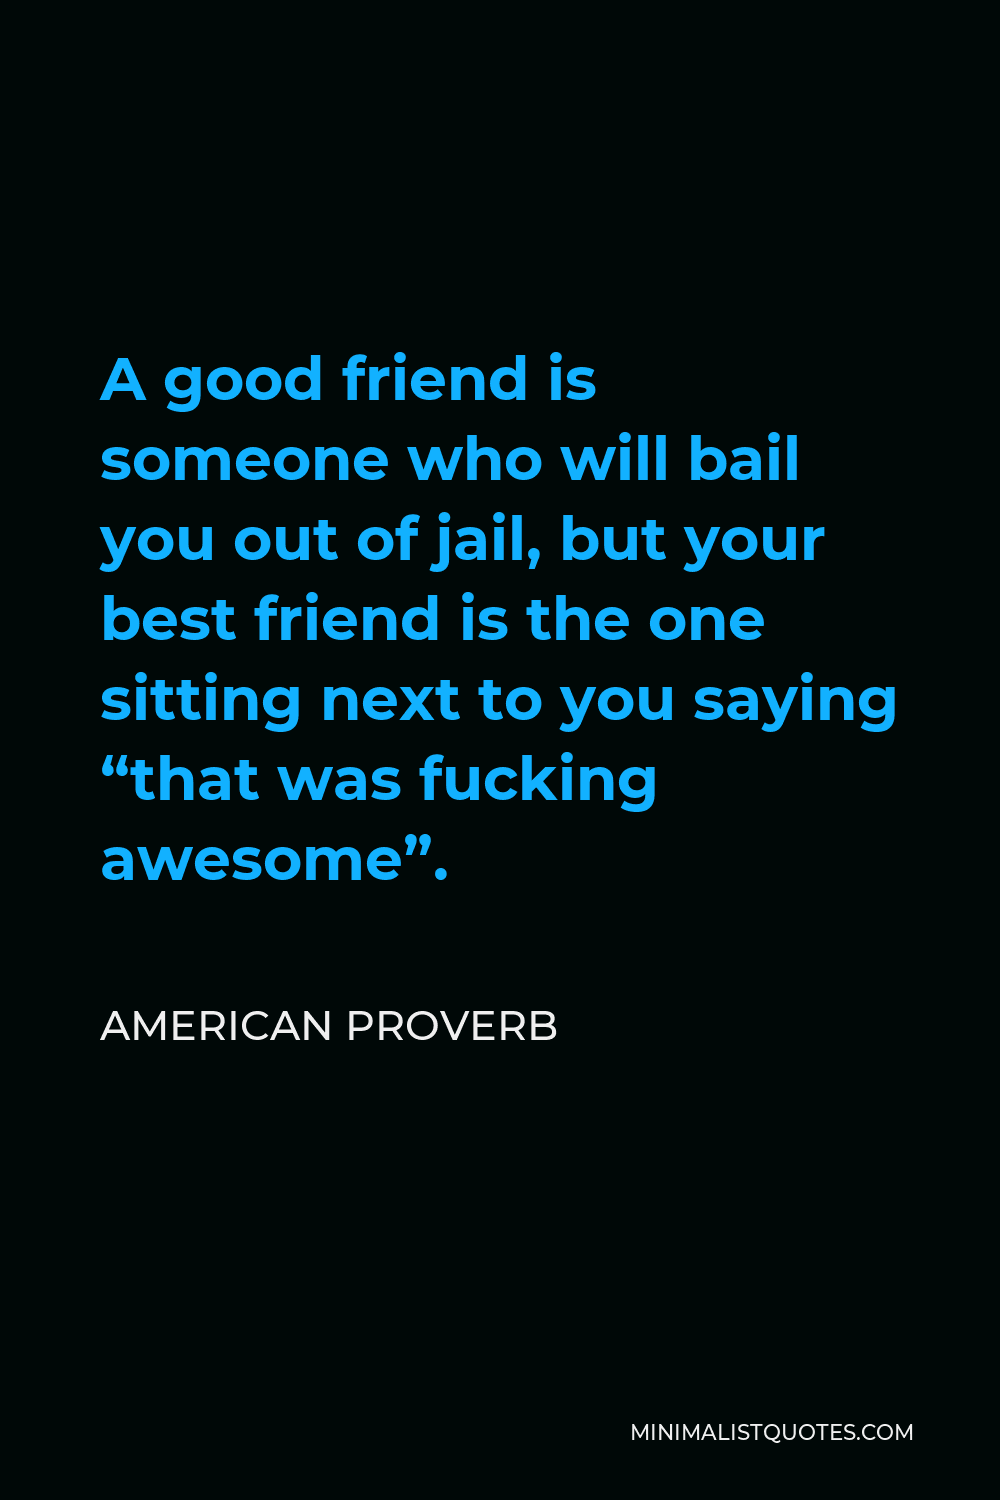 American Proverb Quote - A good friend is someone who will bail you out of jail, but your best friend is the one sitting next to you saying “that was fucking awesome”.